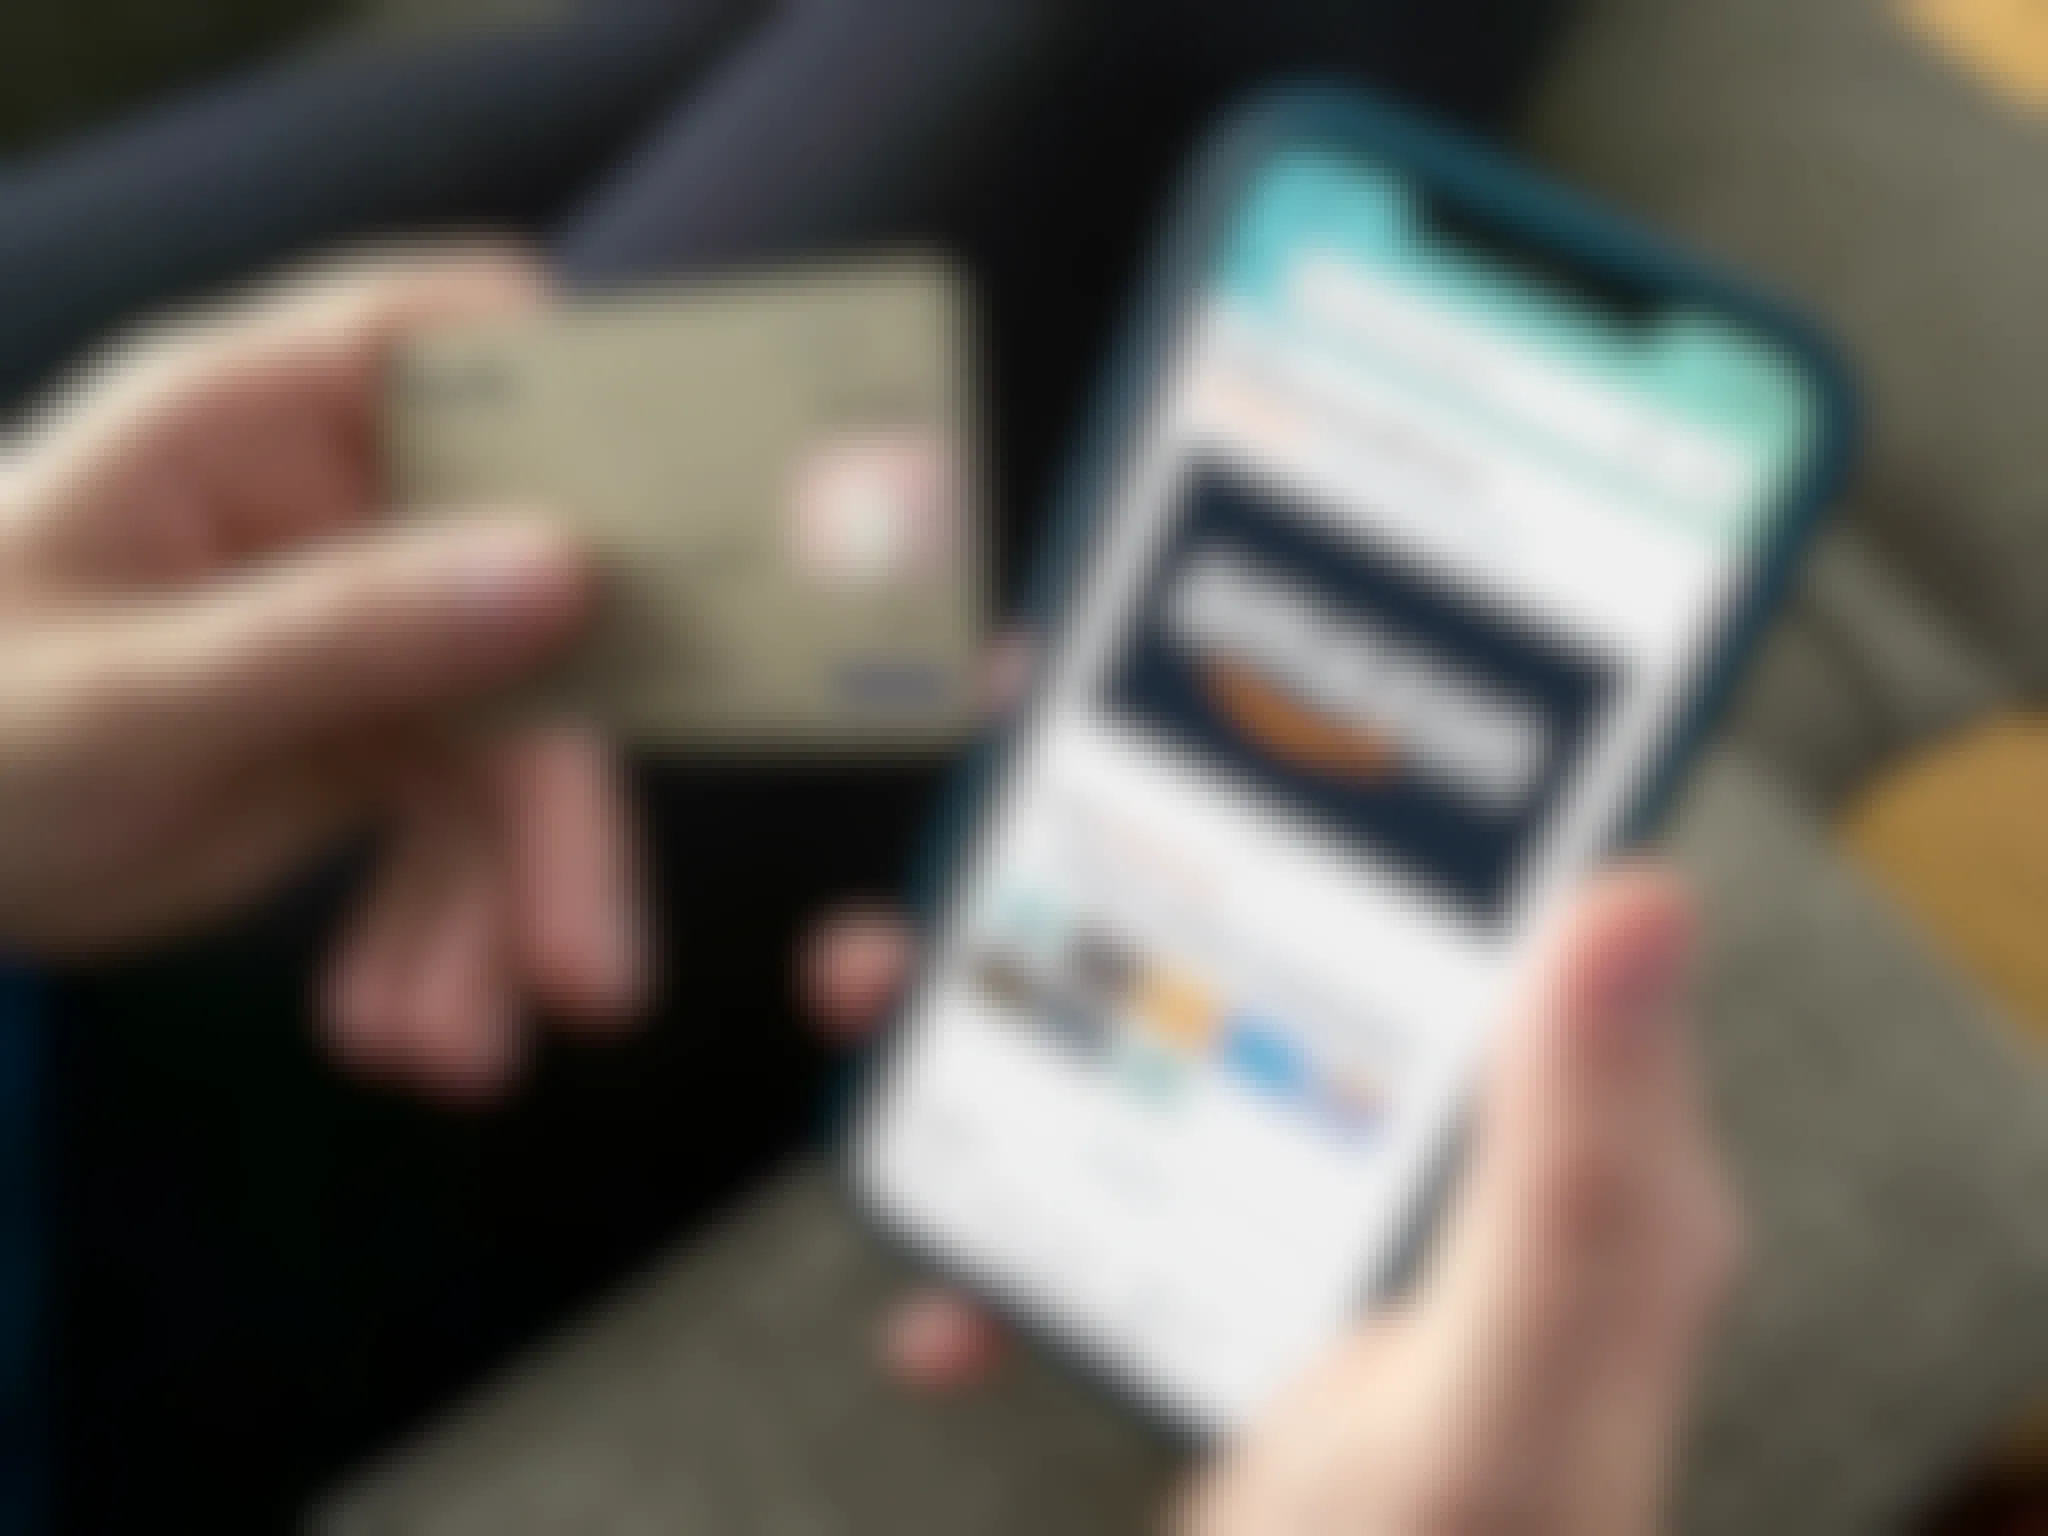 A person holding a visa gift card next to a cell phone open to an amazon gift card purchase page.